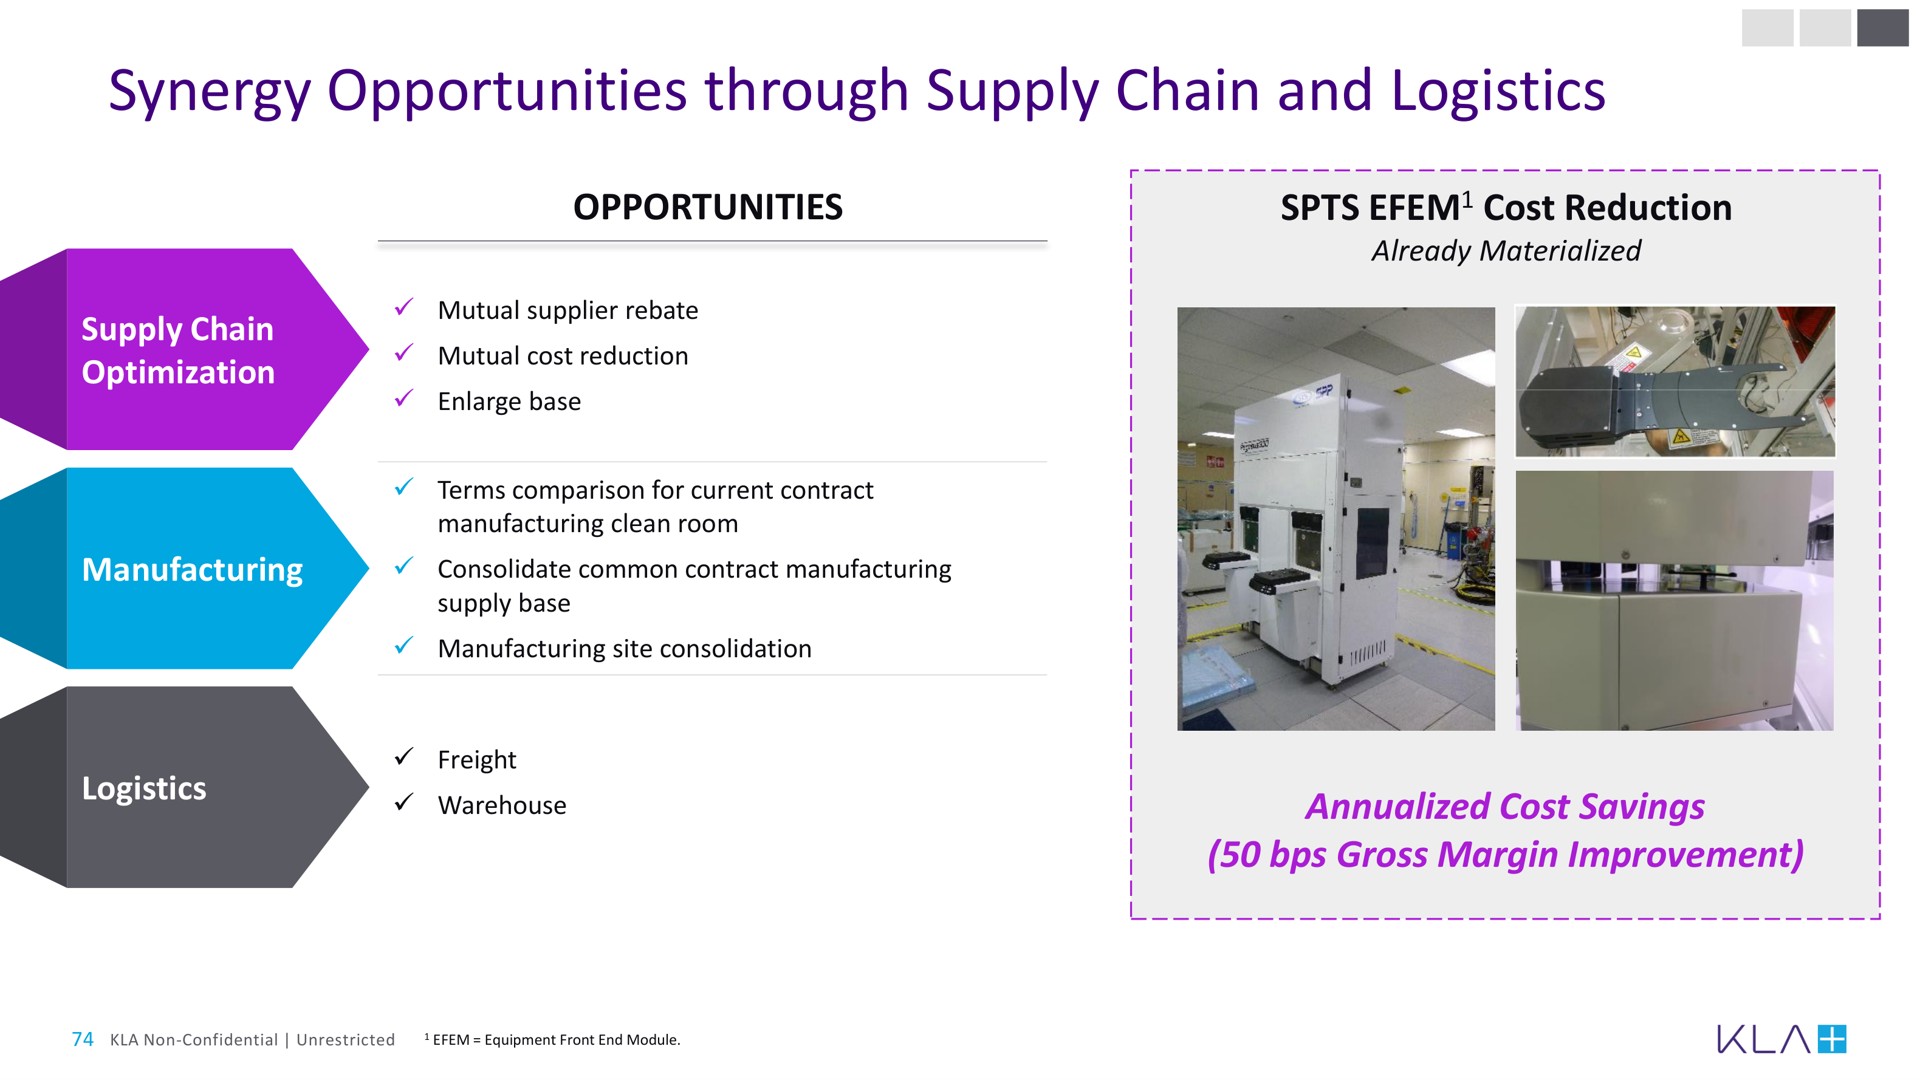 synergy opportunities through supply chain and logistics | KLA